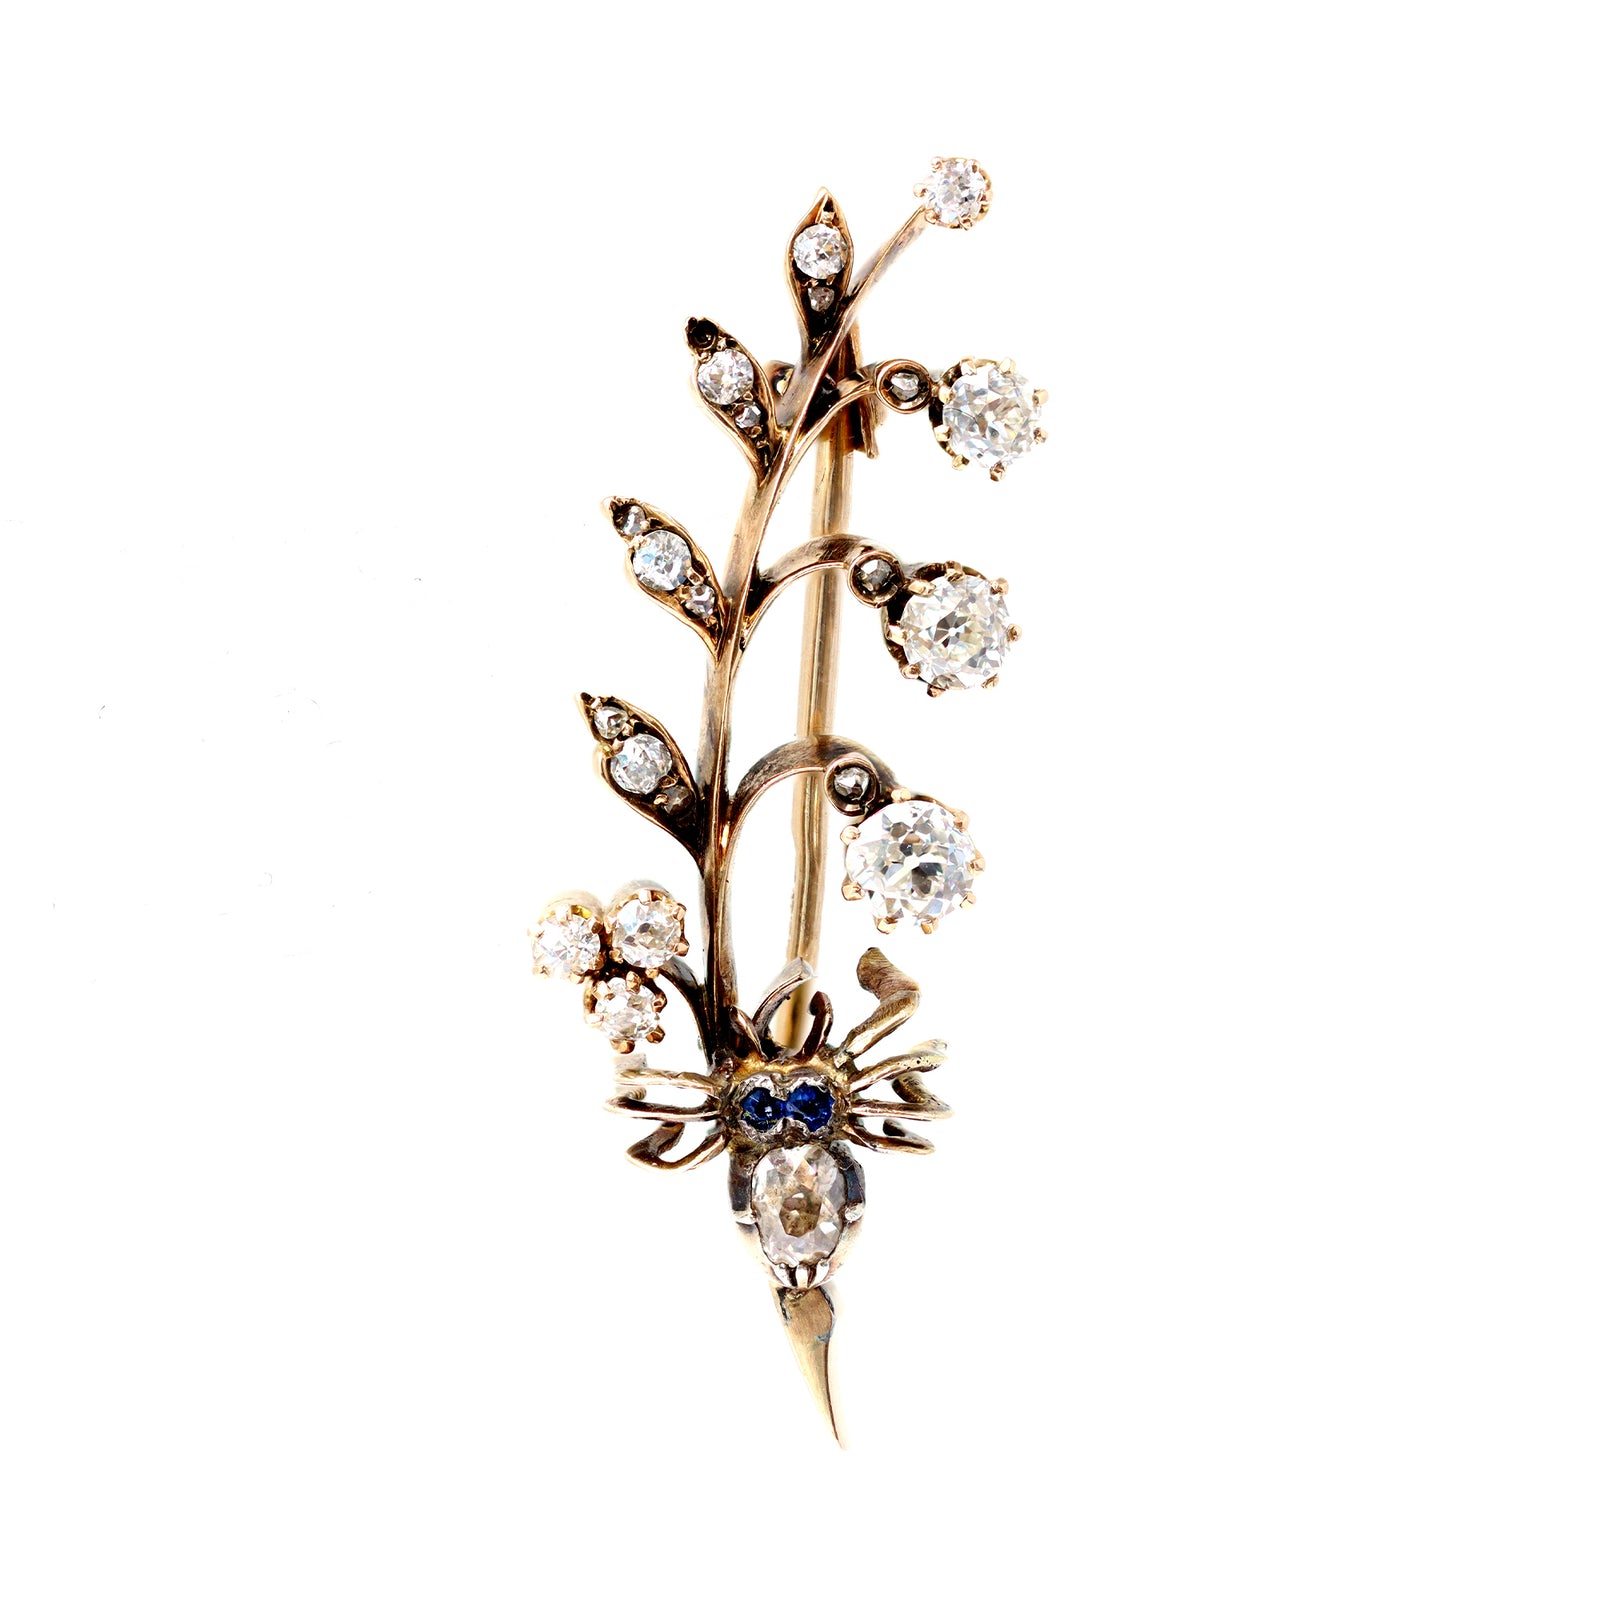 Ever Blossom Brooch, Yellow Gold, Onyx & Diamonds - Categories